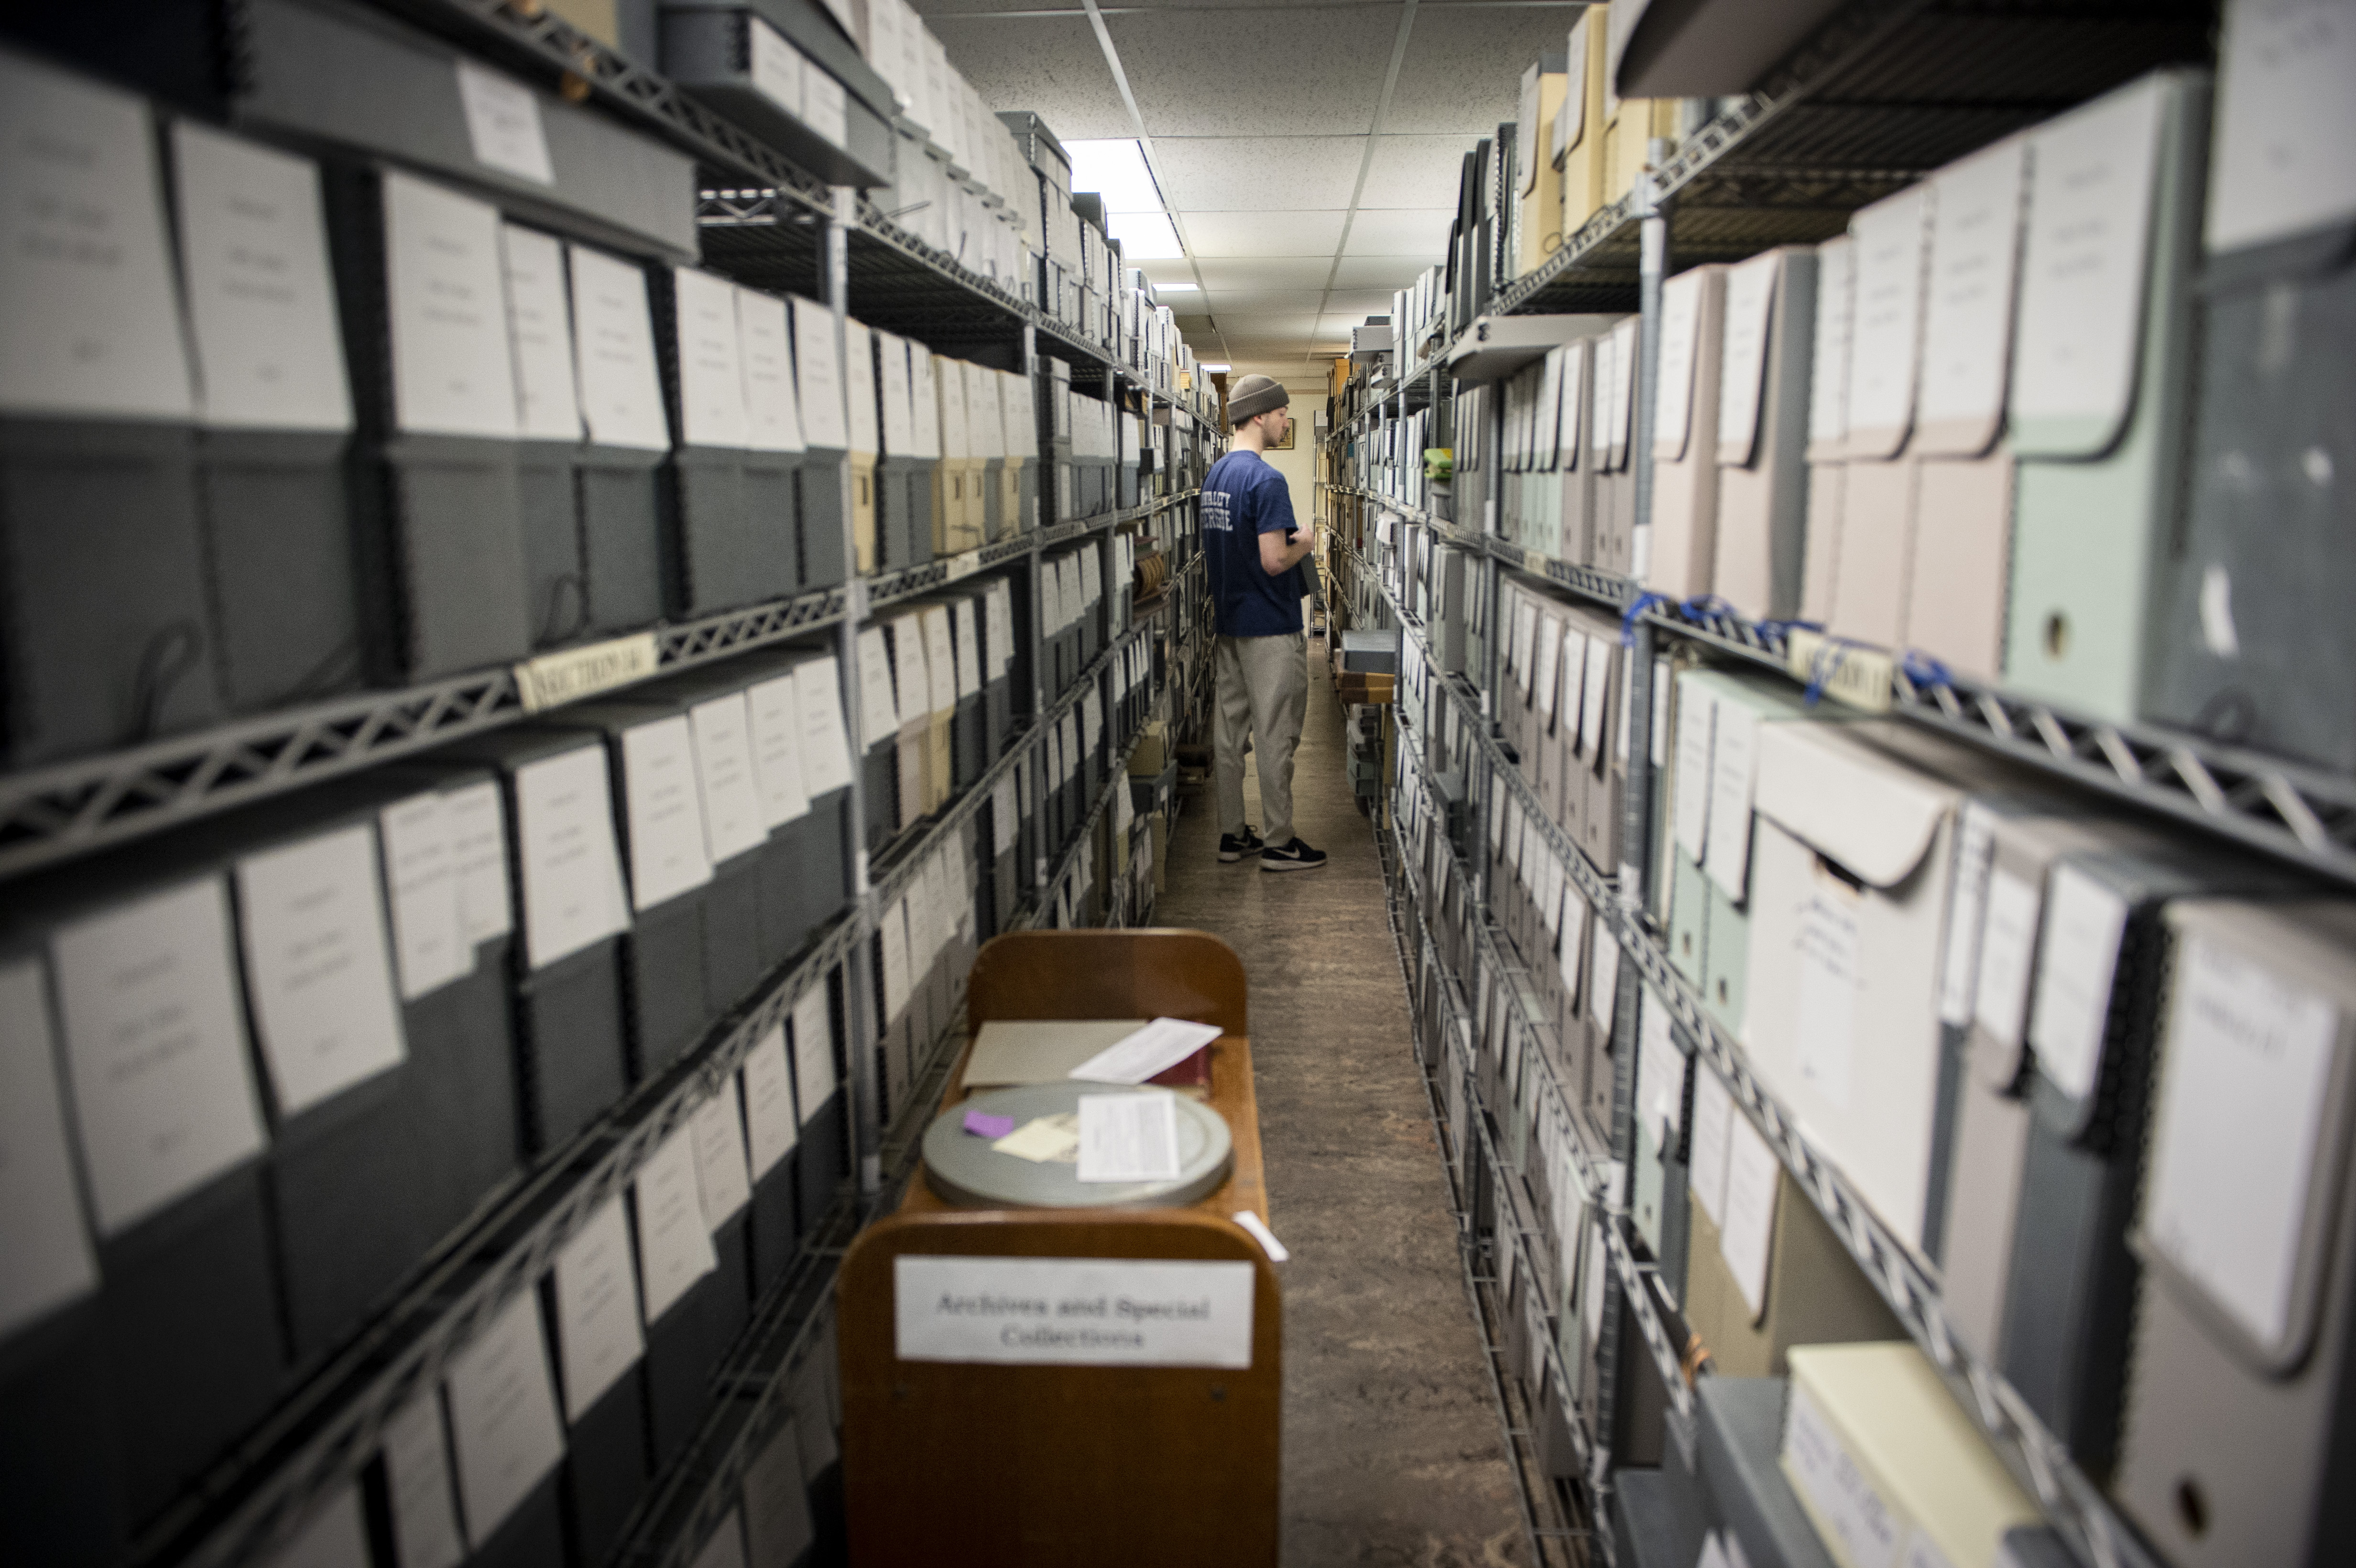 A student worker in the archives stacks